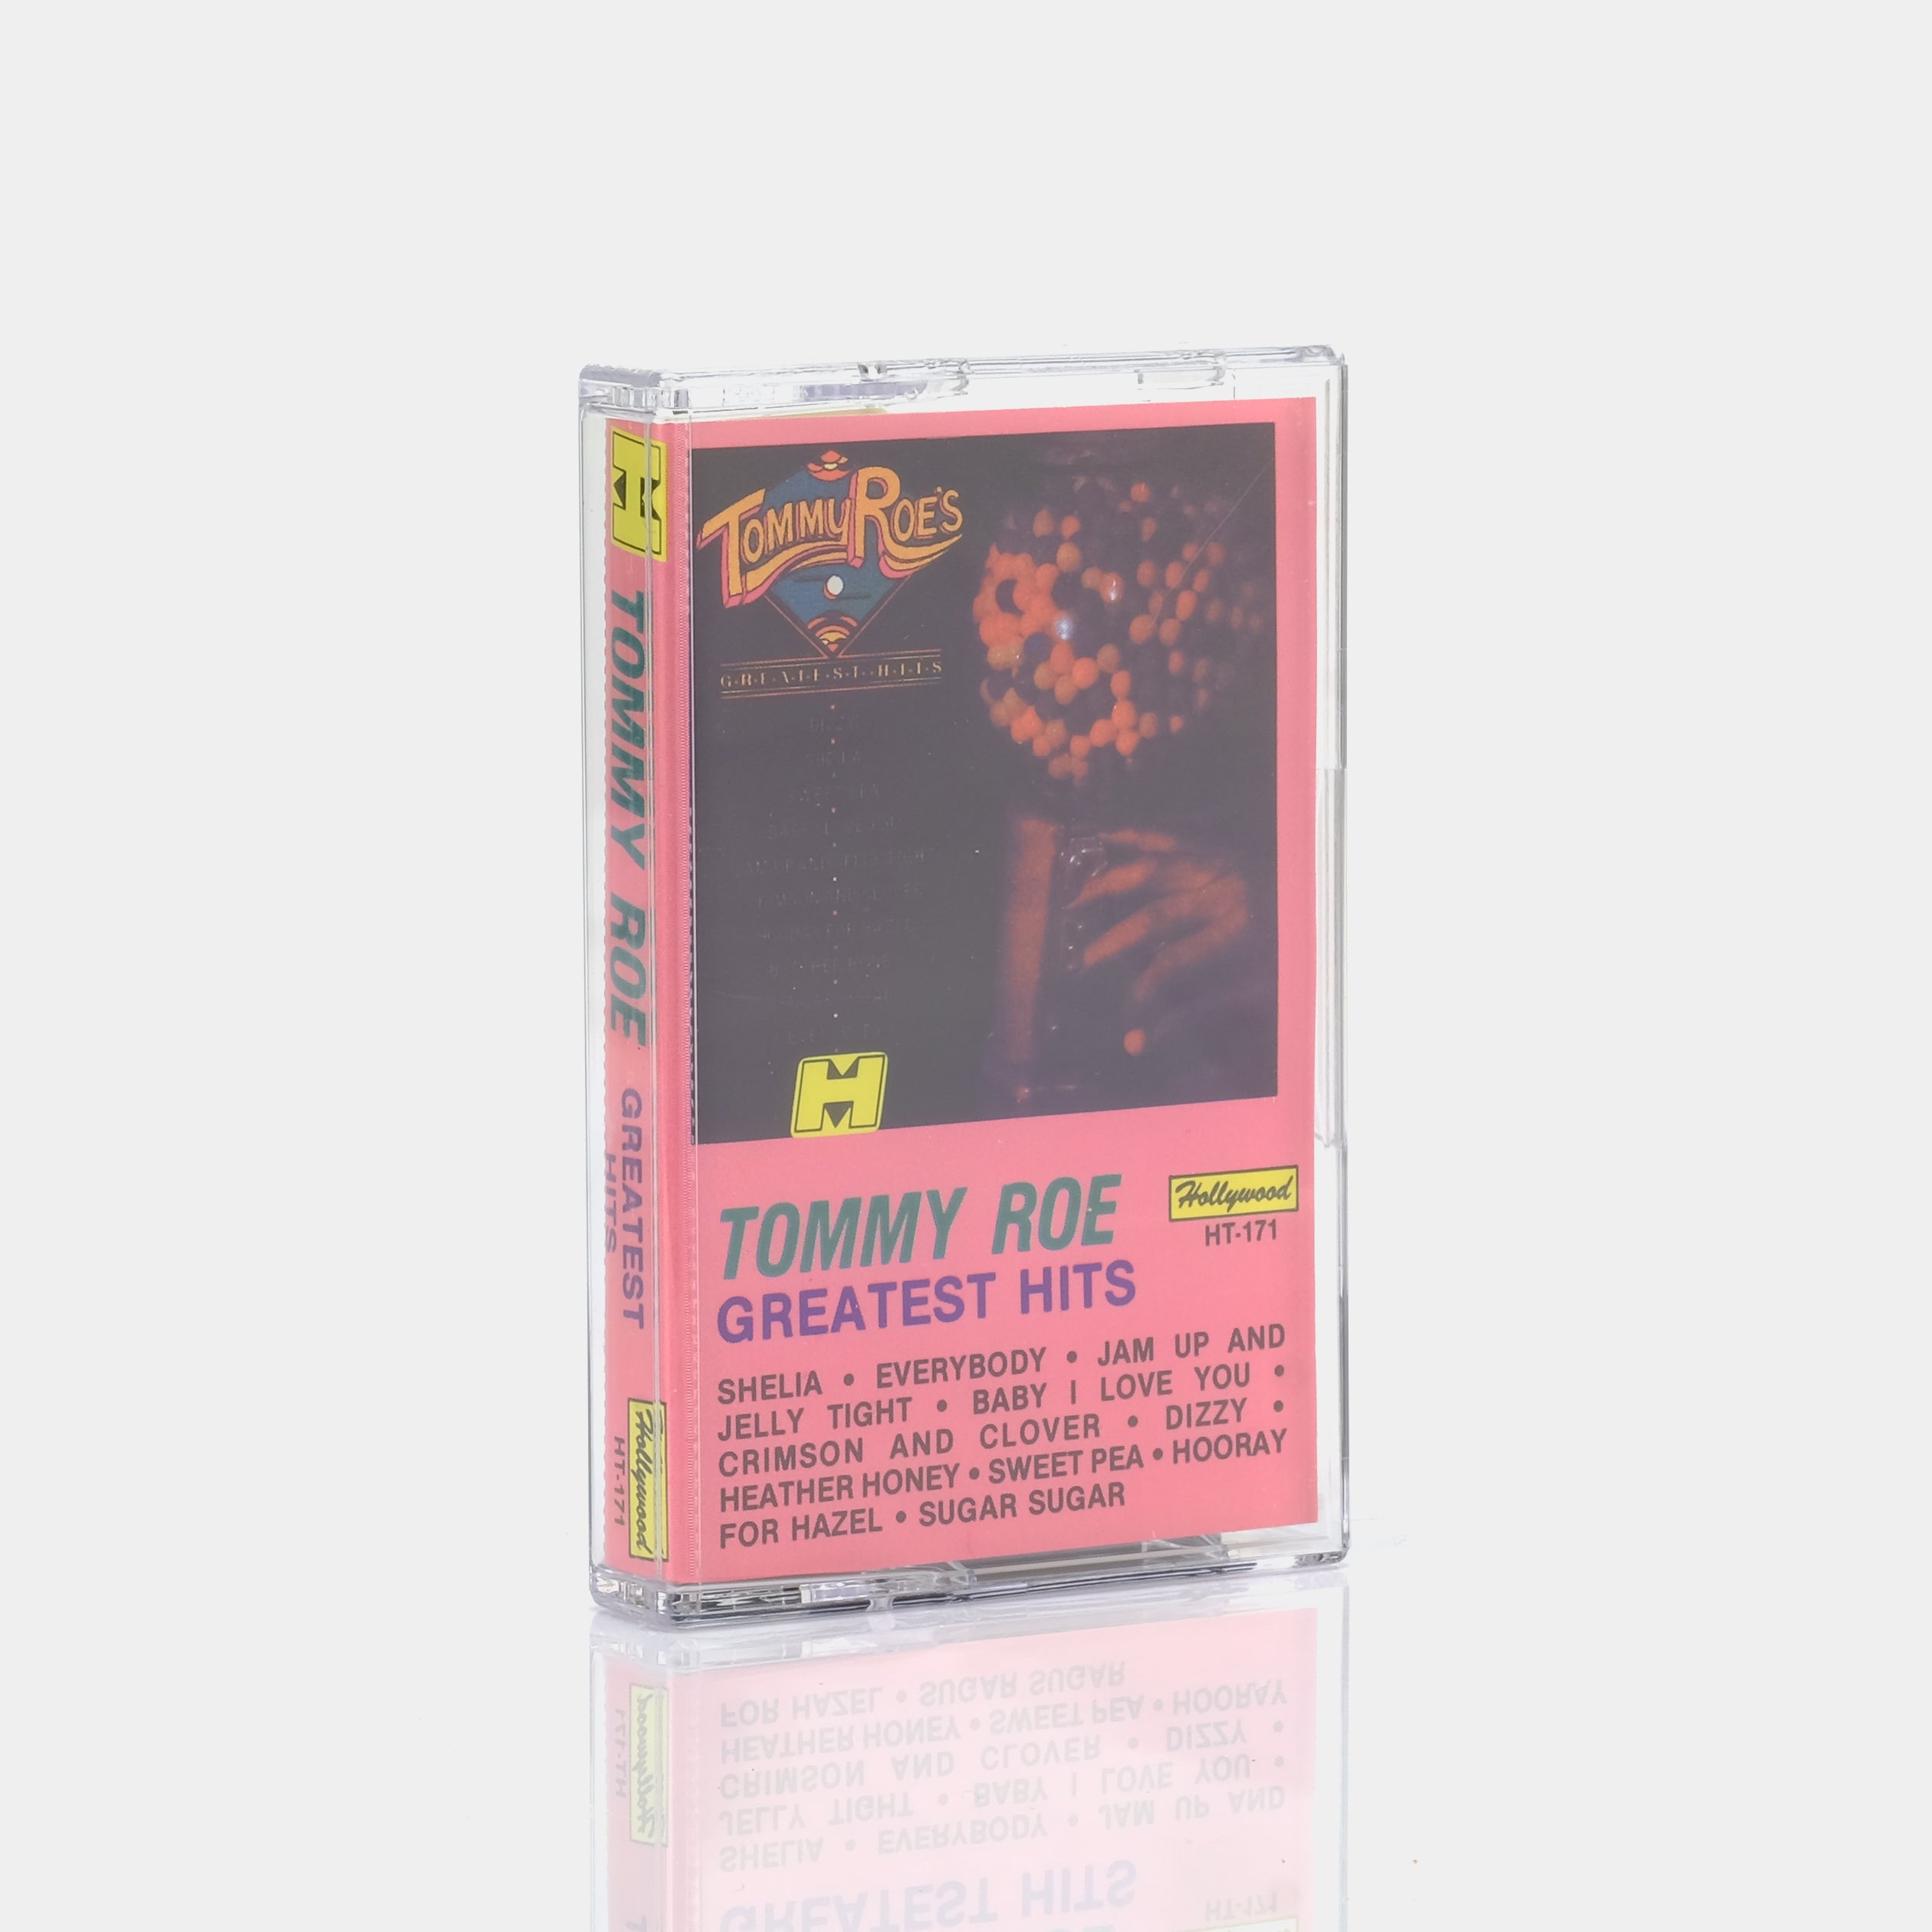 Tommy Roe - Tommy Roe's Greatest Hits Cassette Tape